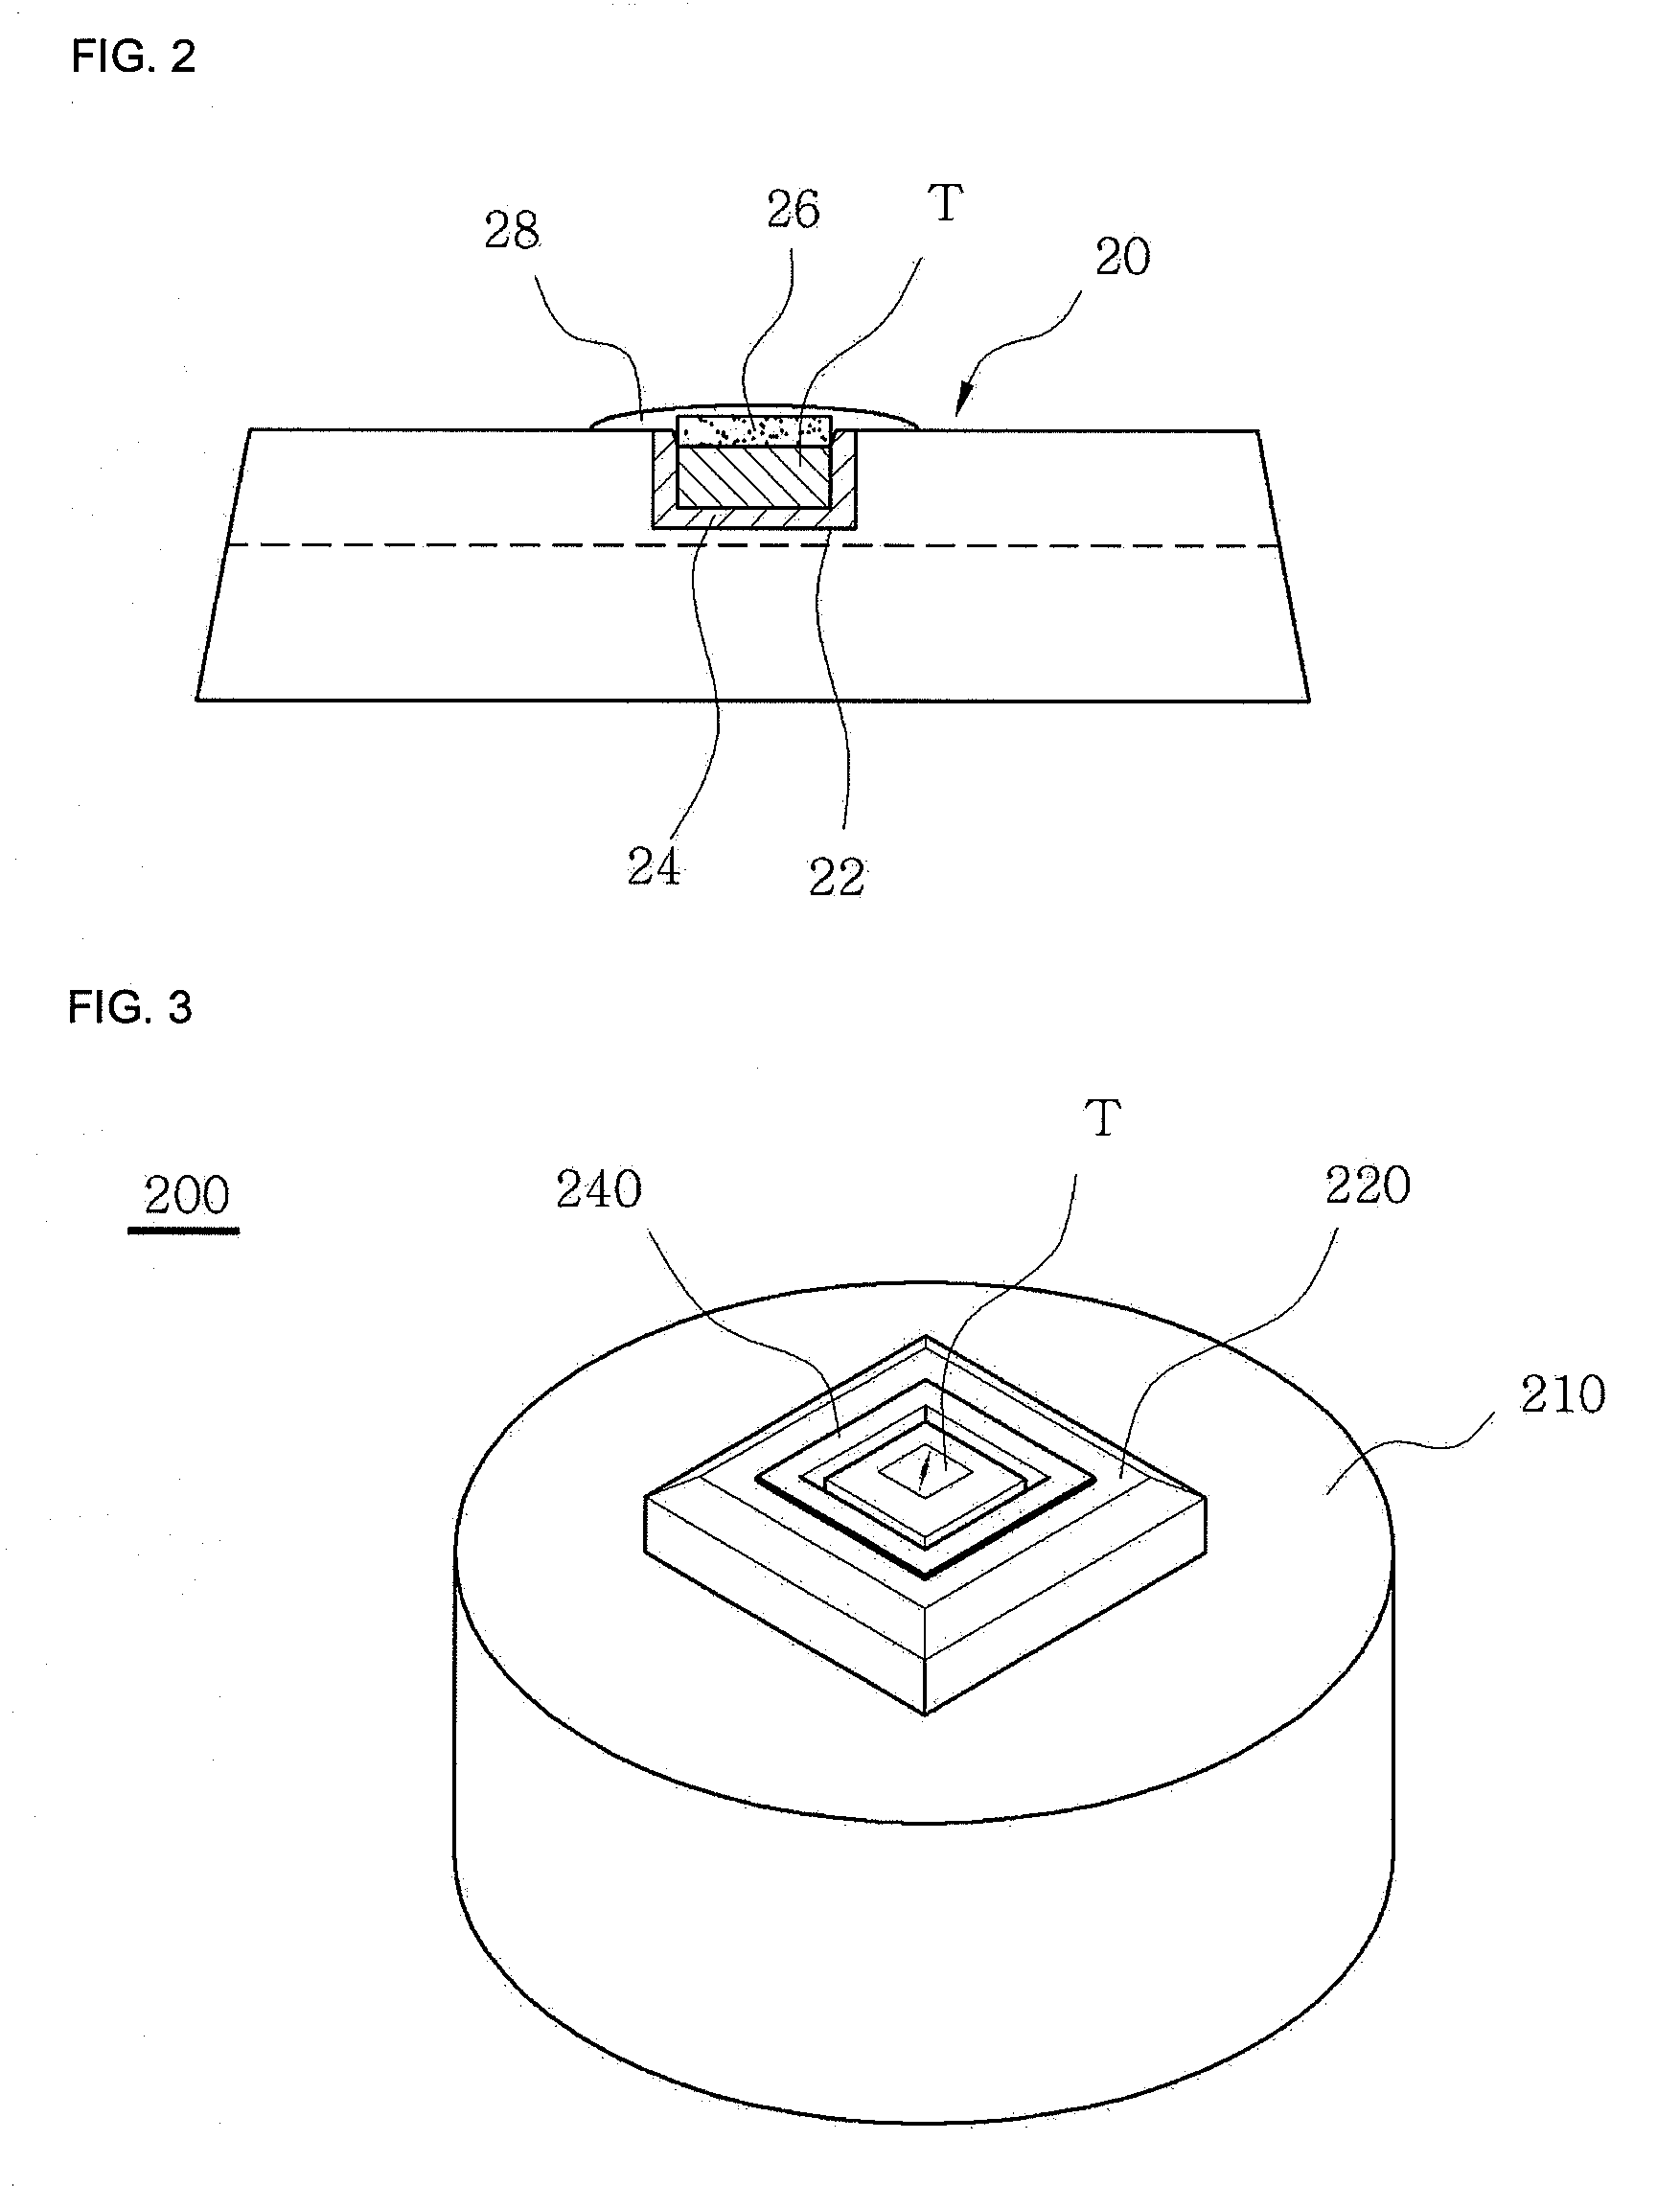 Container lid with a RFID tag